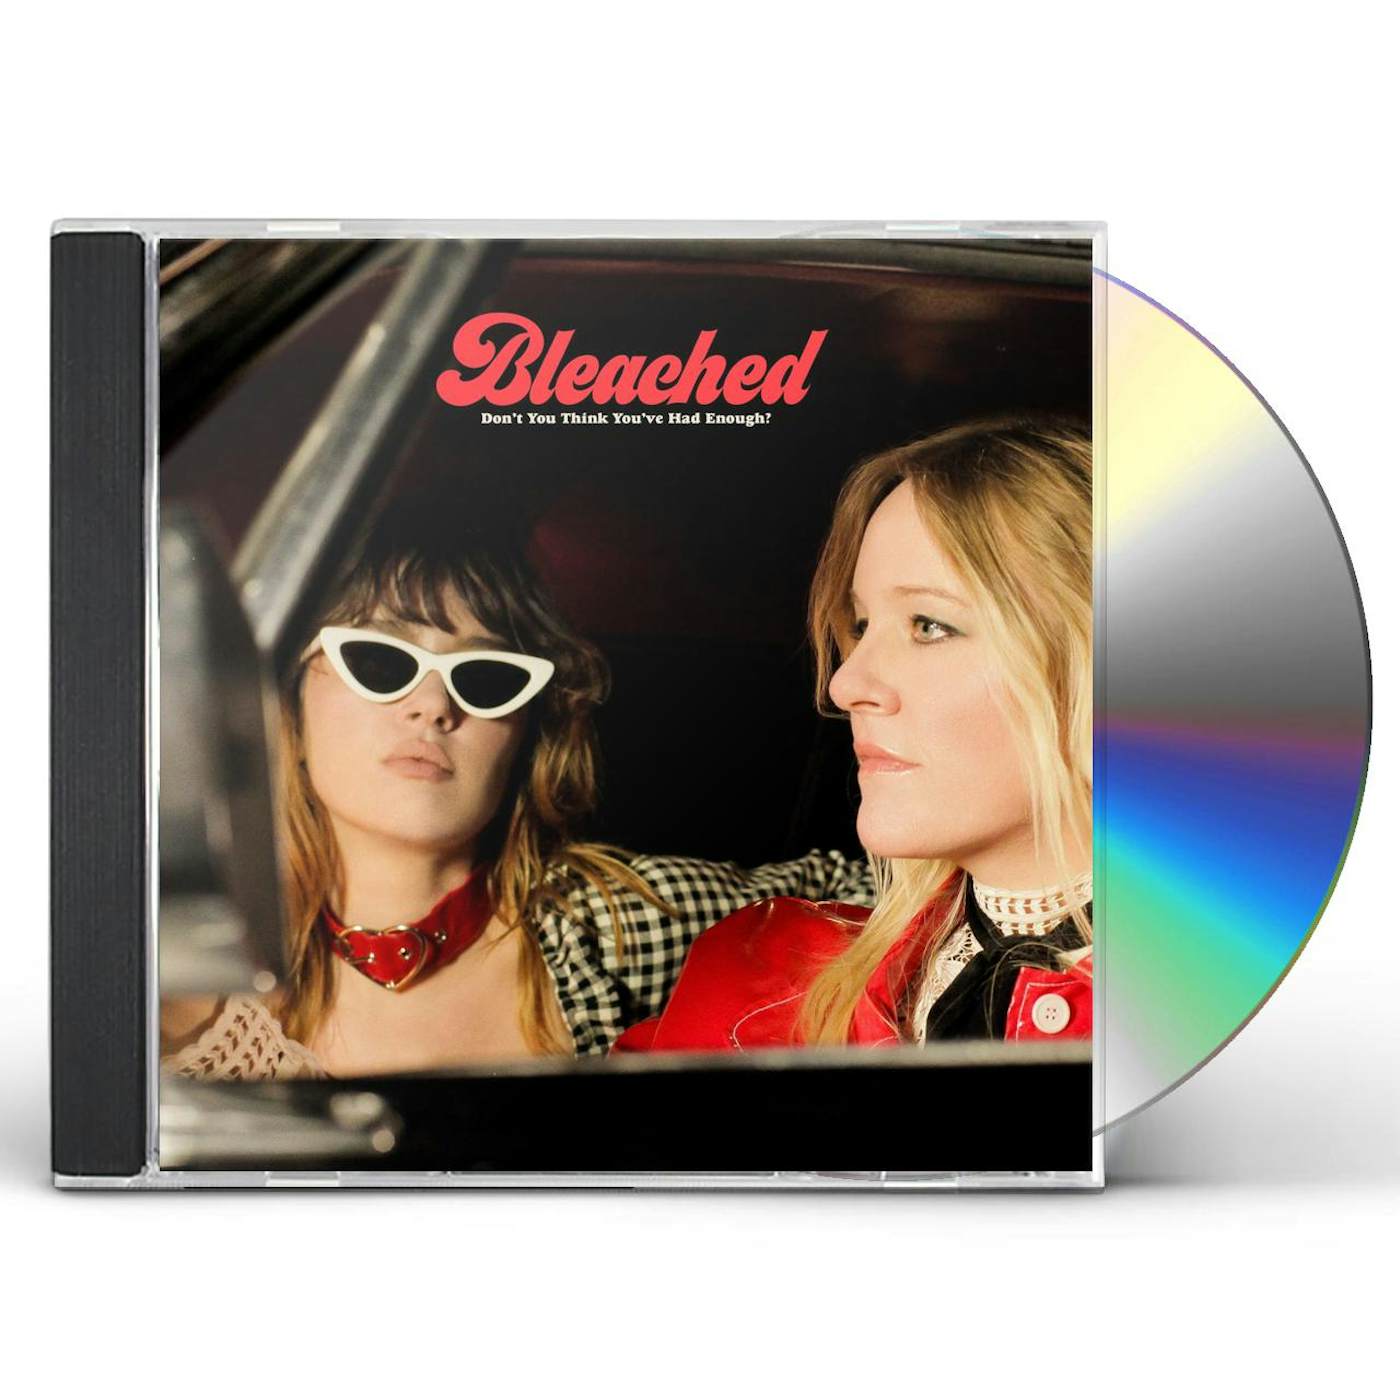 Bleached DON’T YOU THINK YOU’VE HAD ENOUGH CD